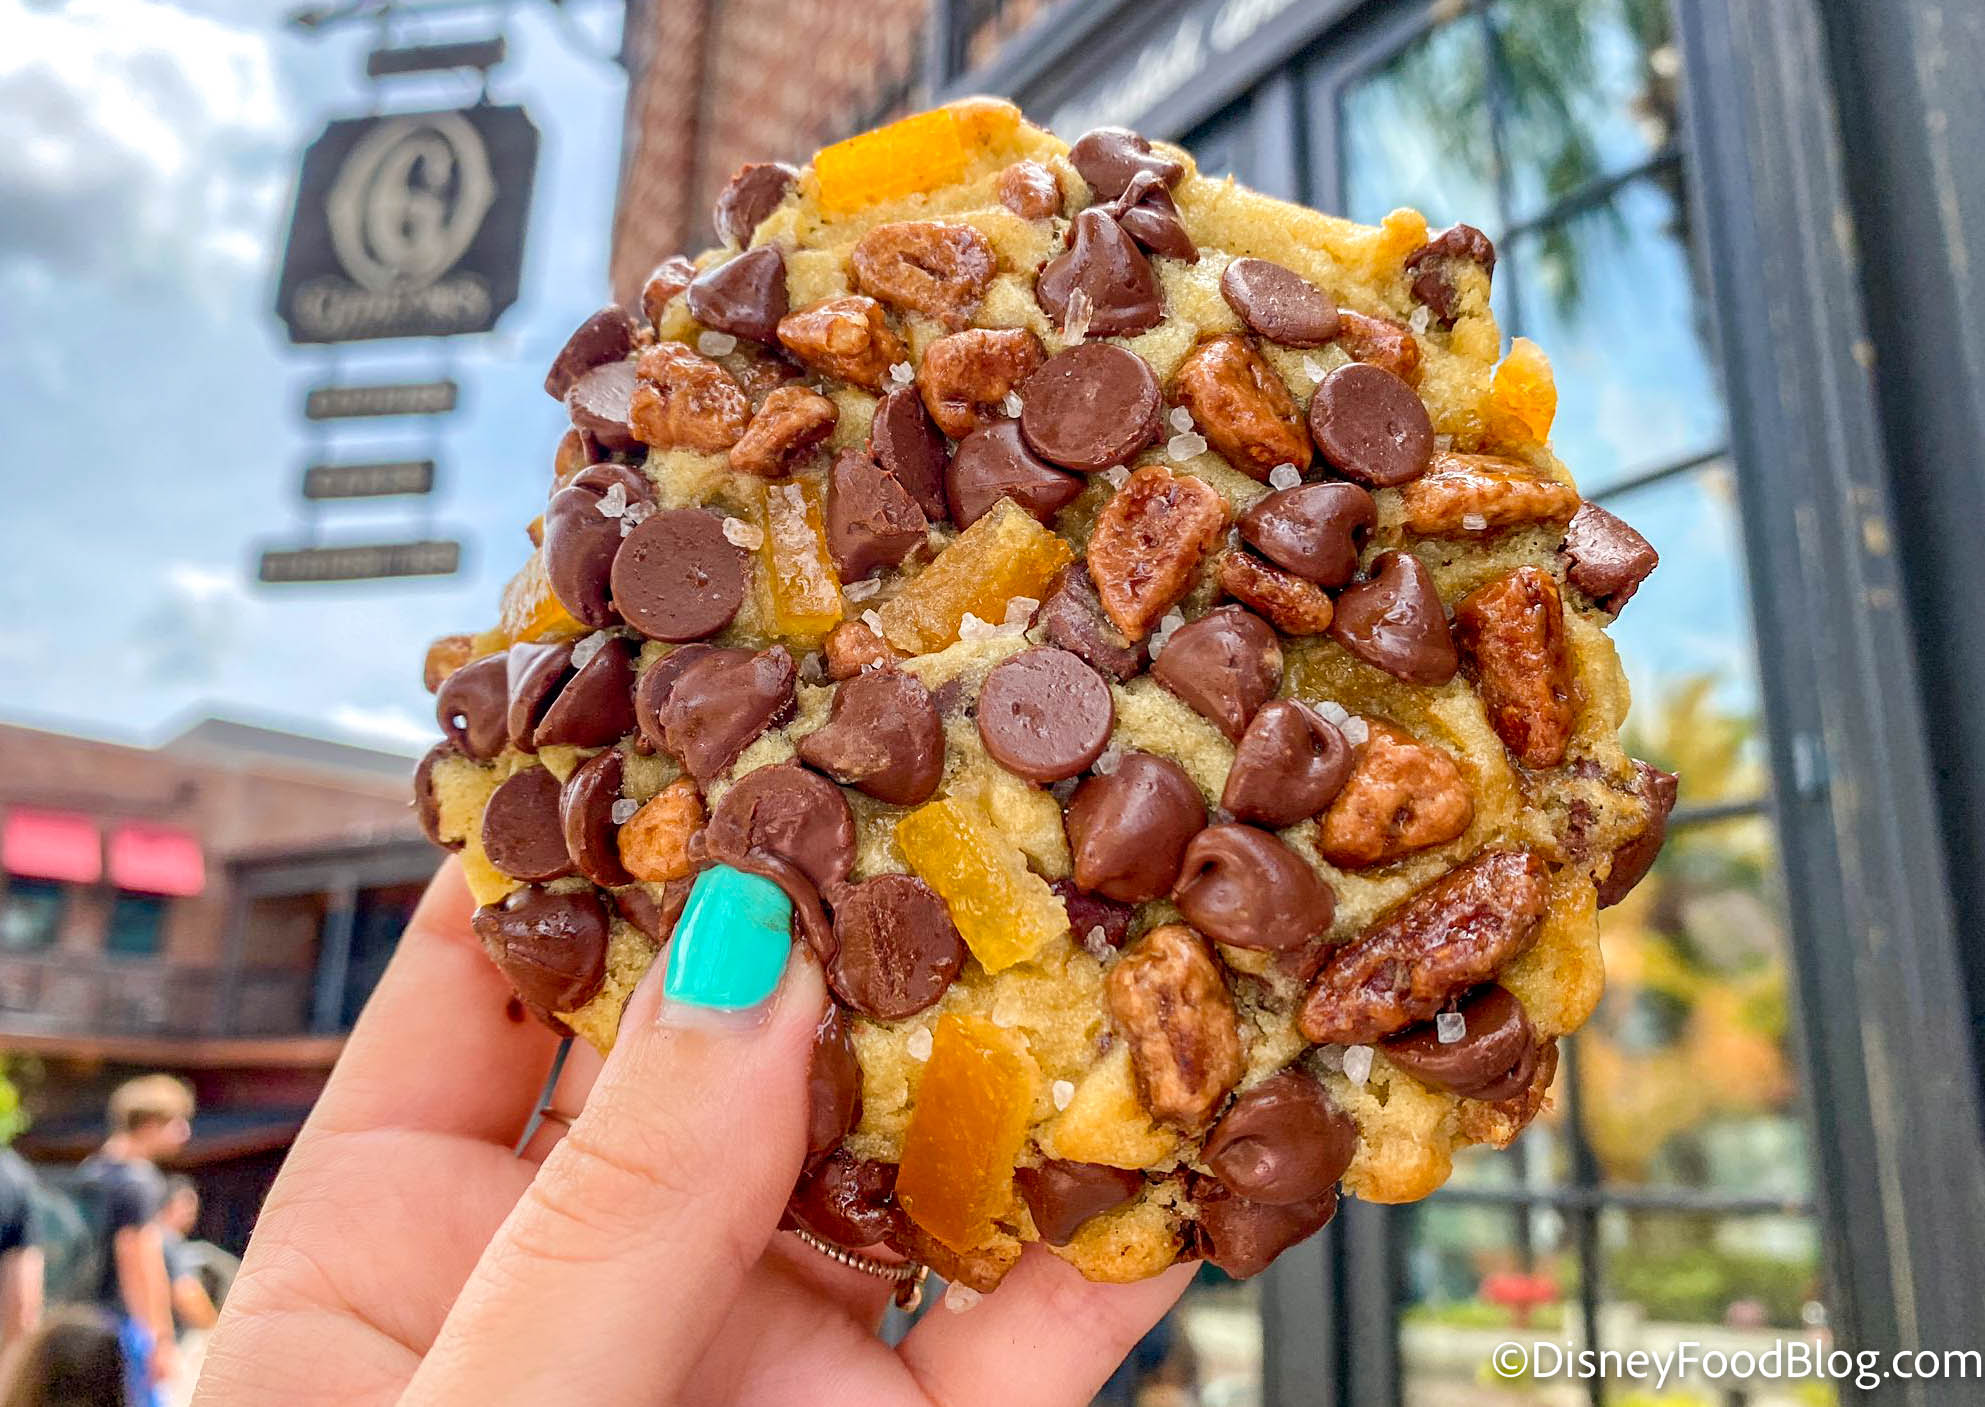 REVIEW: FOUR Filling (And Delicious) Disney World Treats for Only $6 (!!)